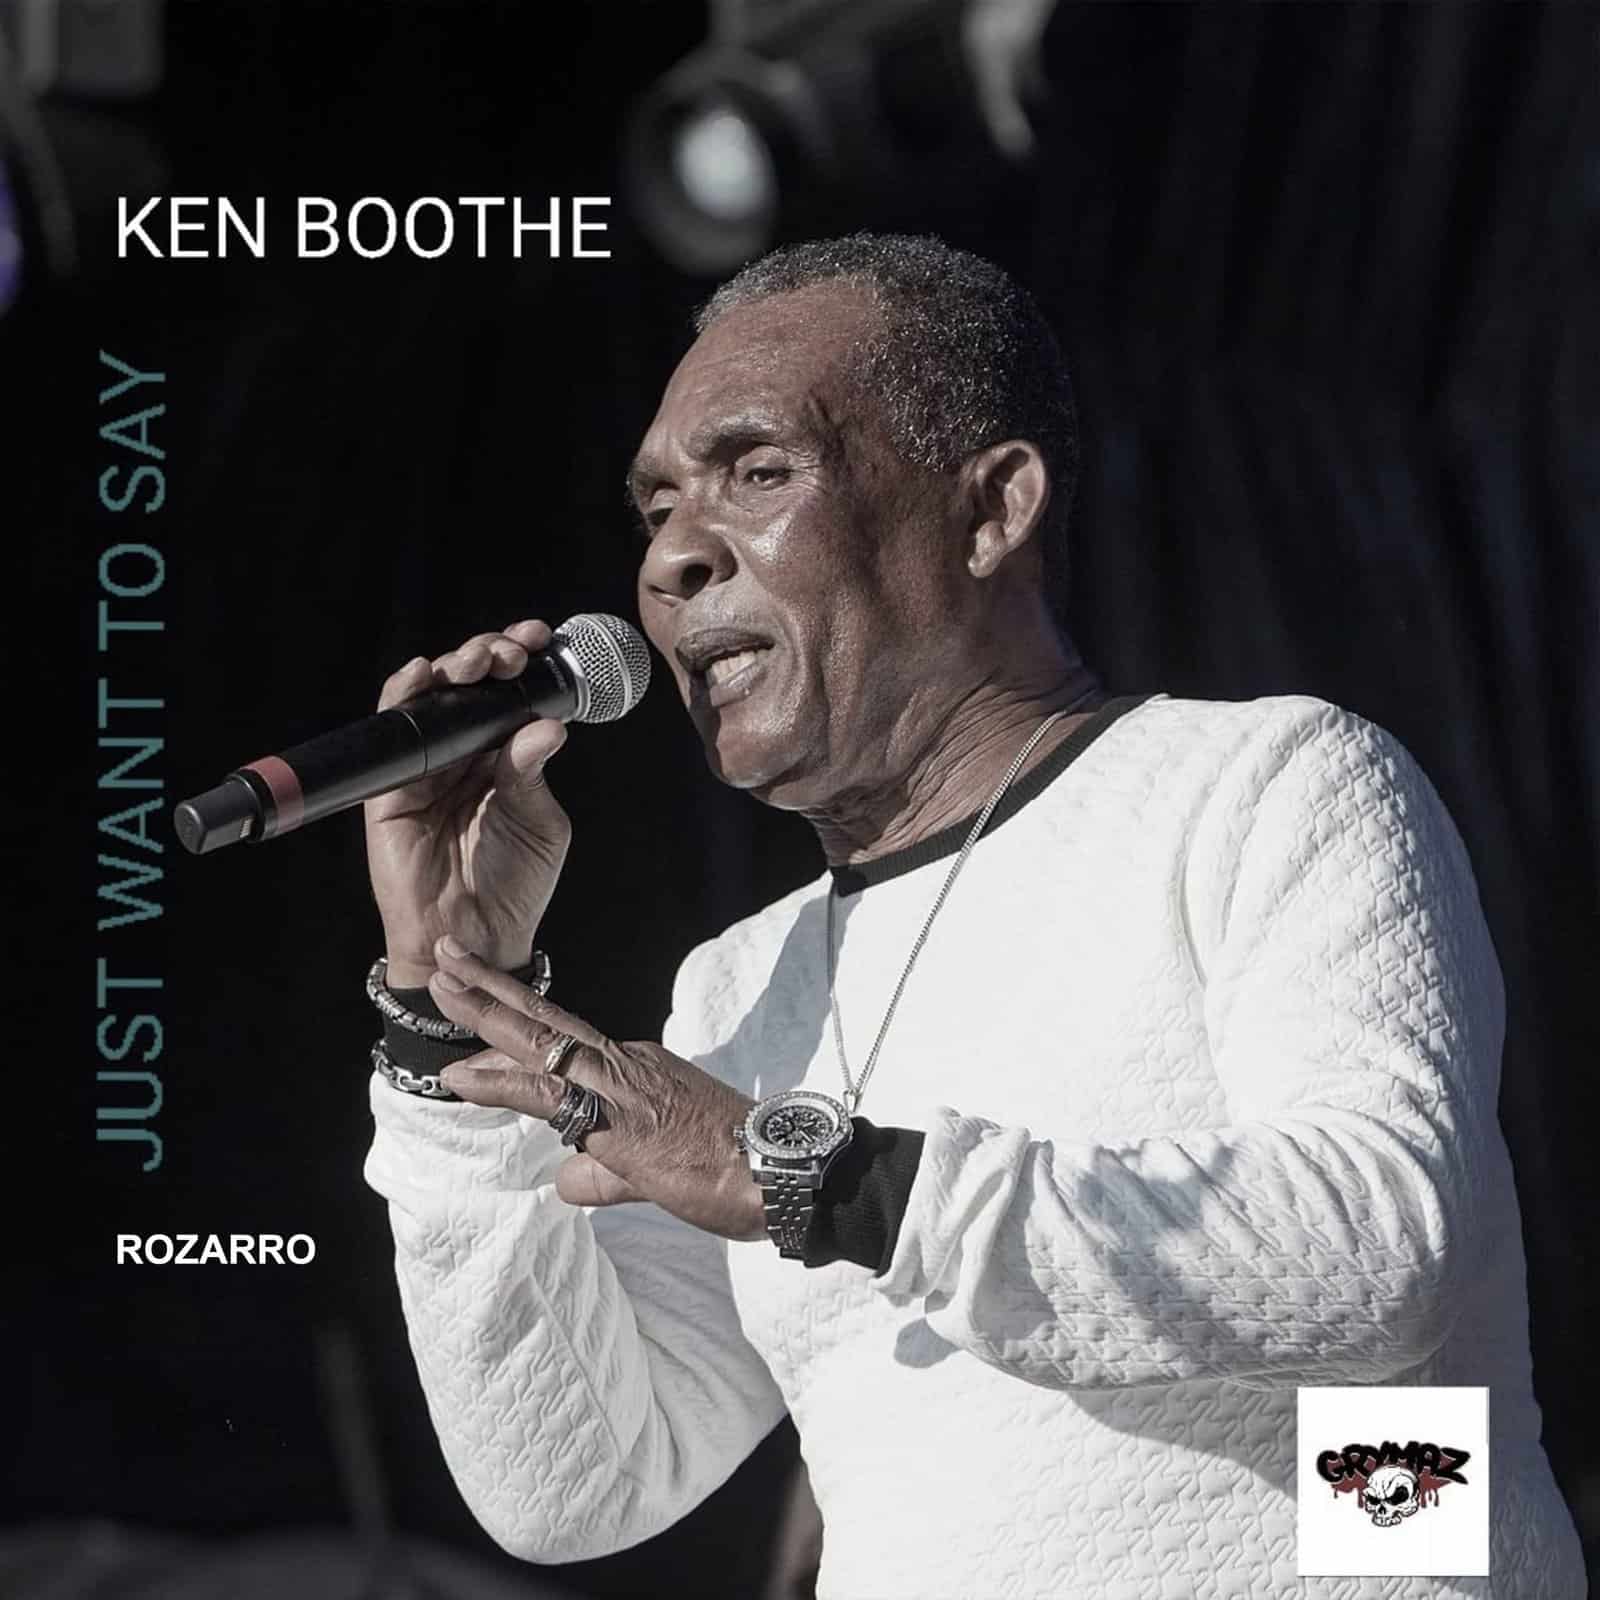 Ken Boothe & Rozarro - Just Want to Say - Rozarro Newboss Music